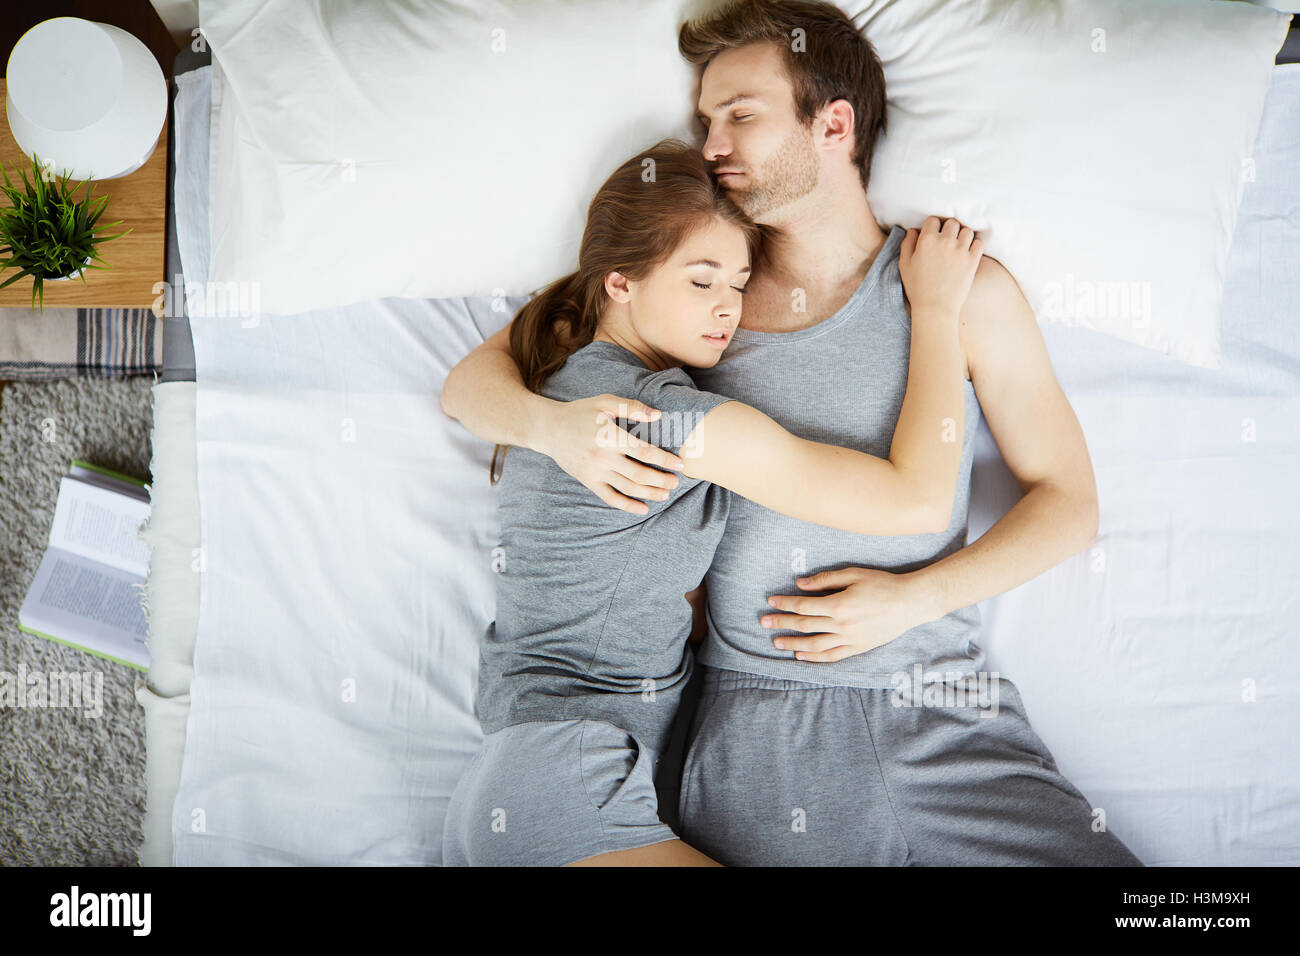 Restful couple sleeping in embrace Stock Photo